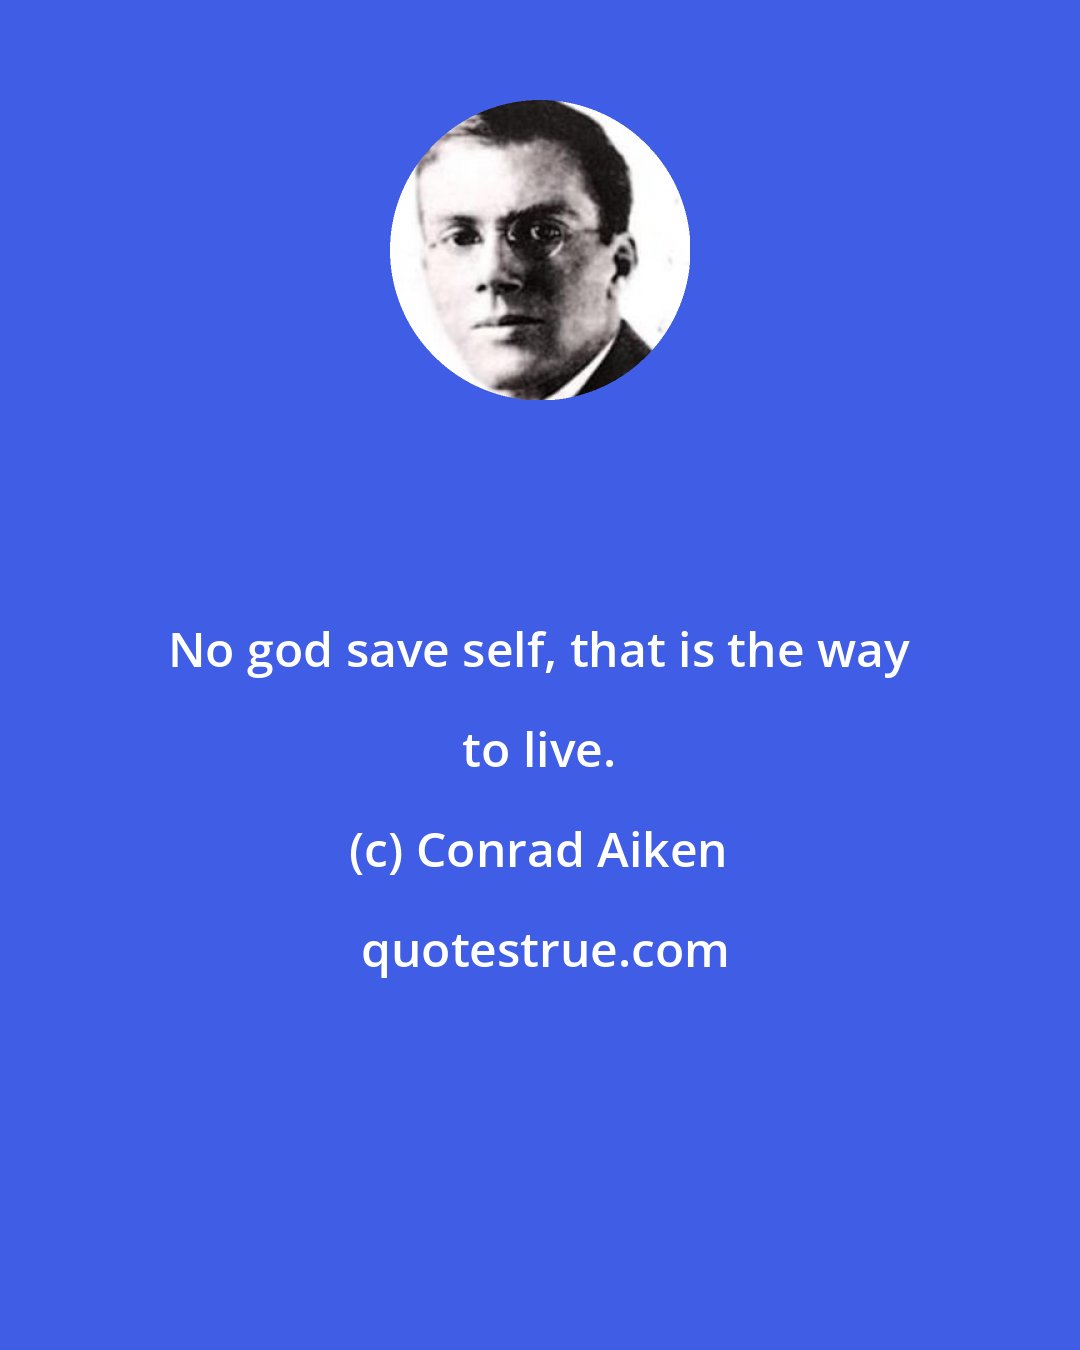 Conrad Aiken: No god save self, that is the way to live.